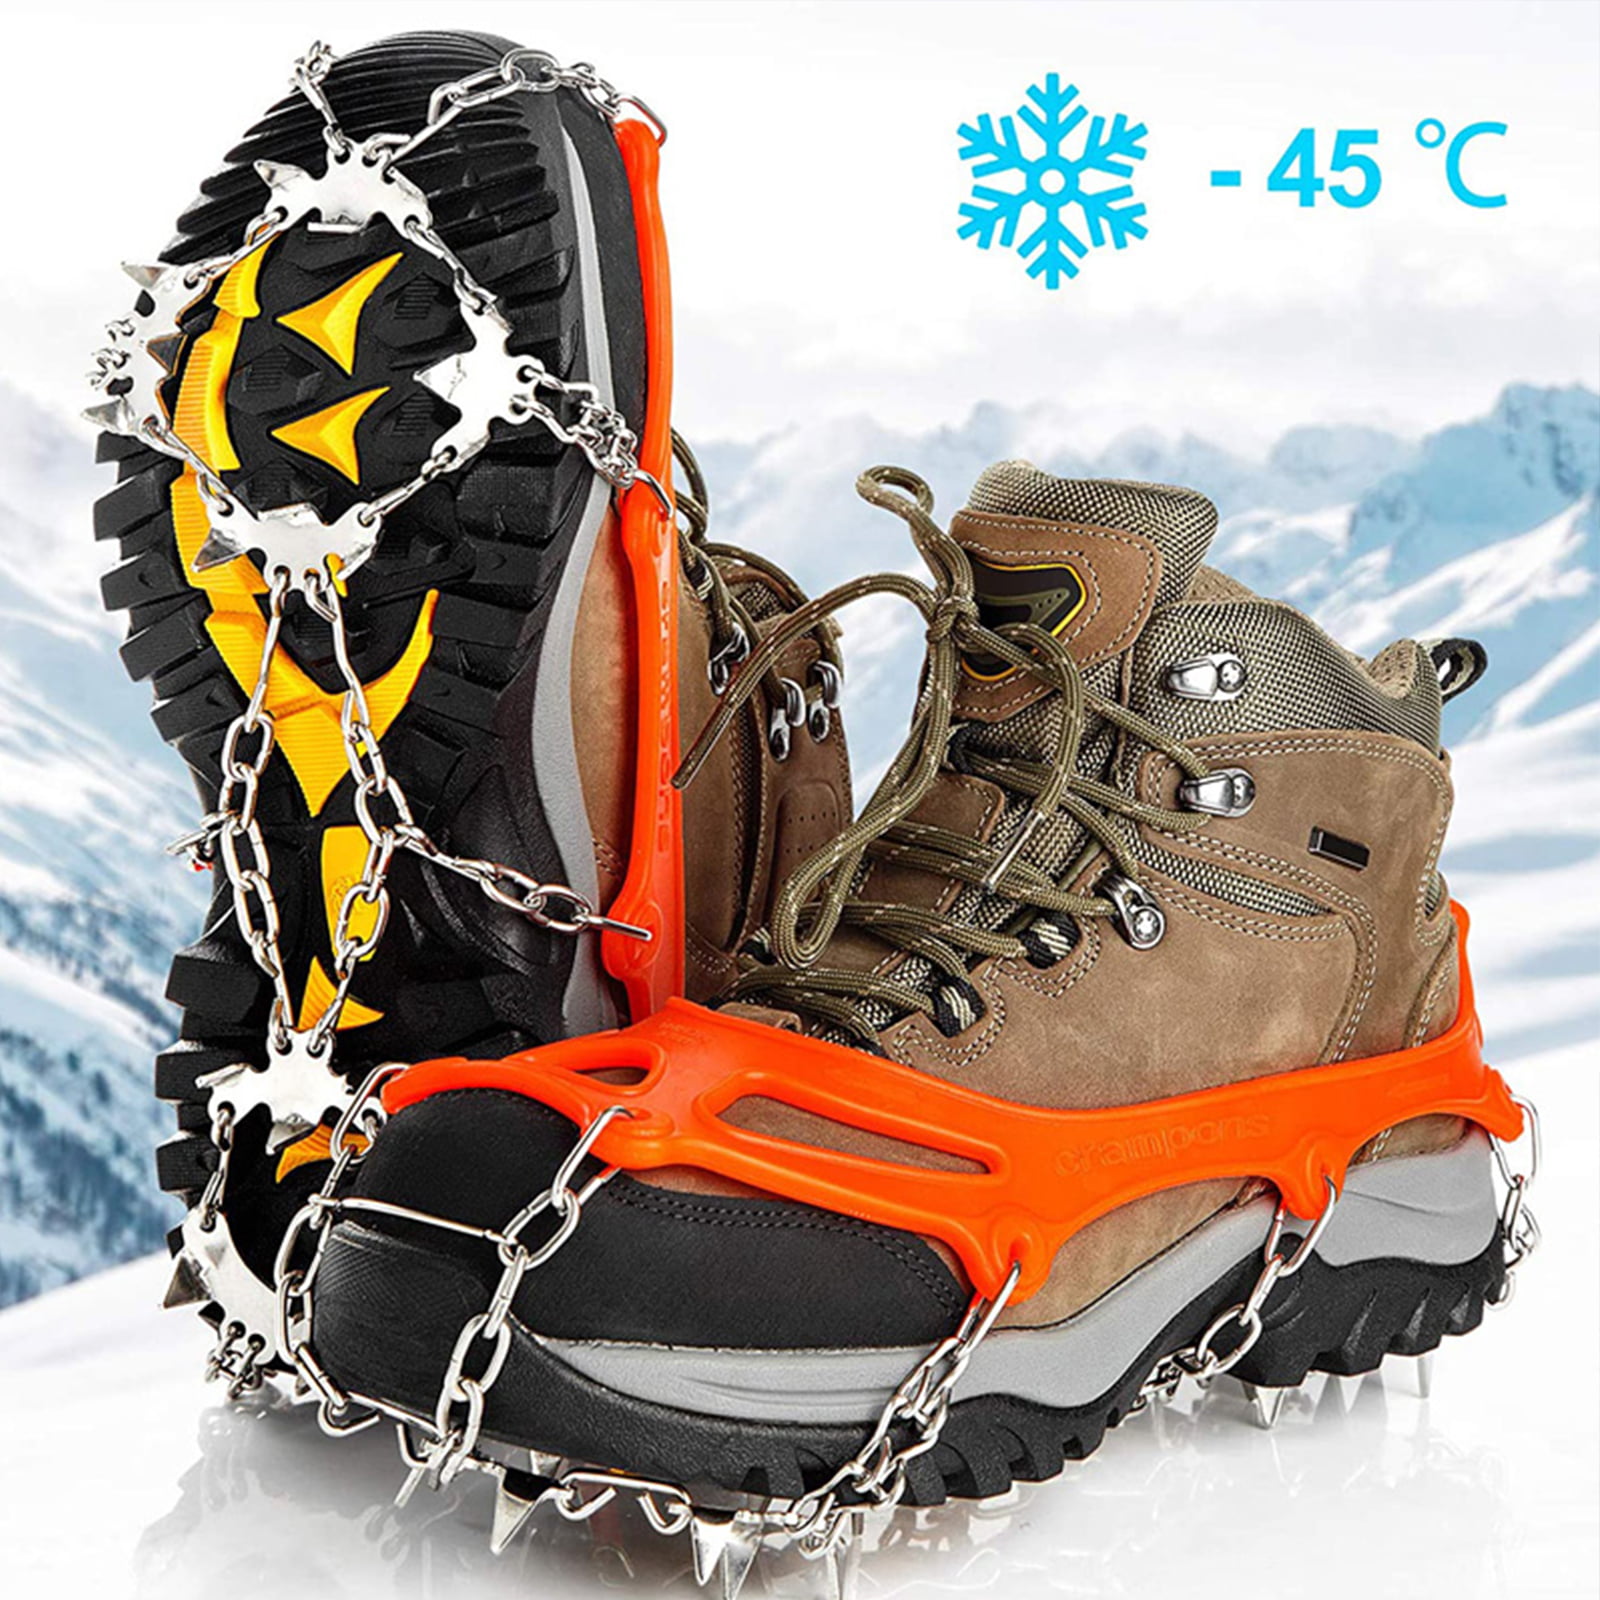 Crampons Traction Cleats Ice Snow Grips w/ 19 Spikes System Safe Protect for Ice 